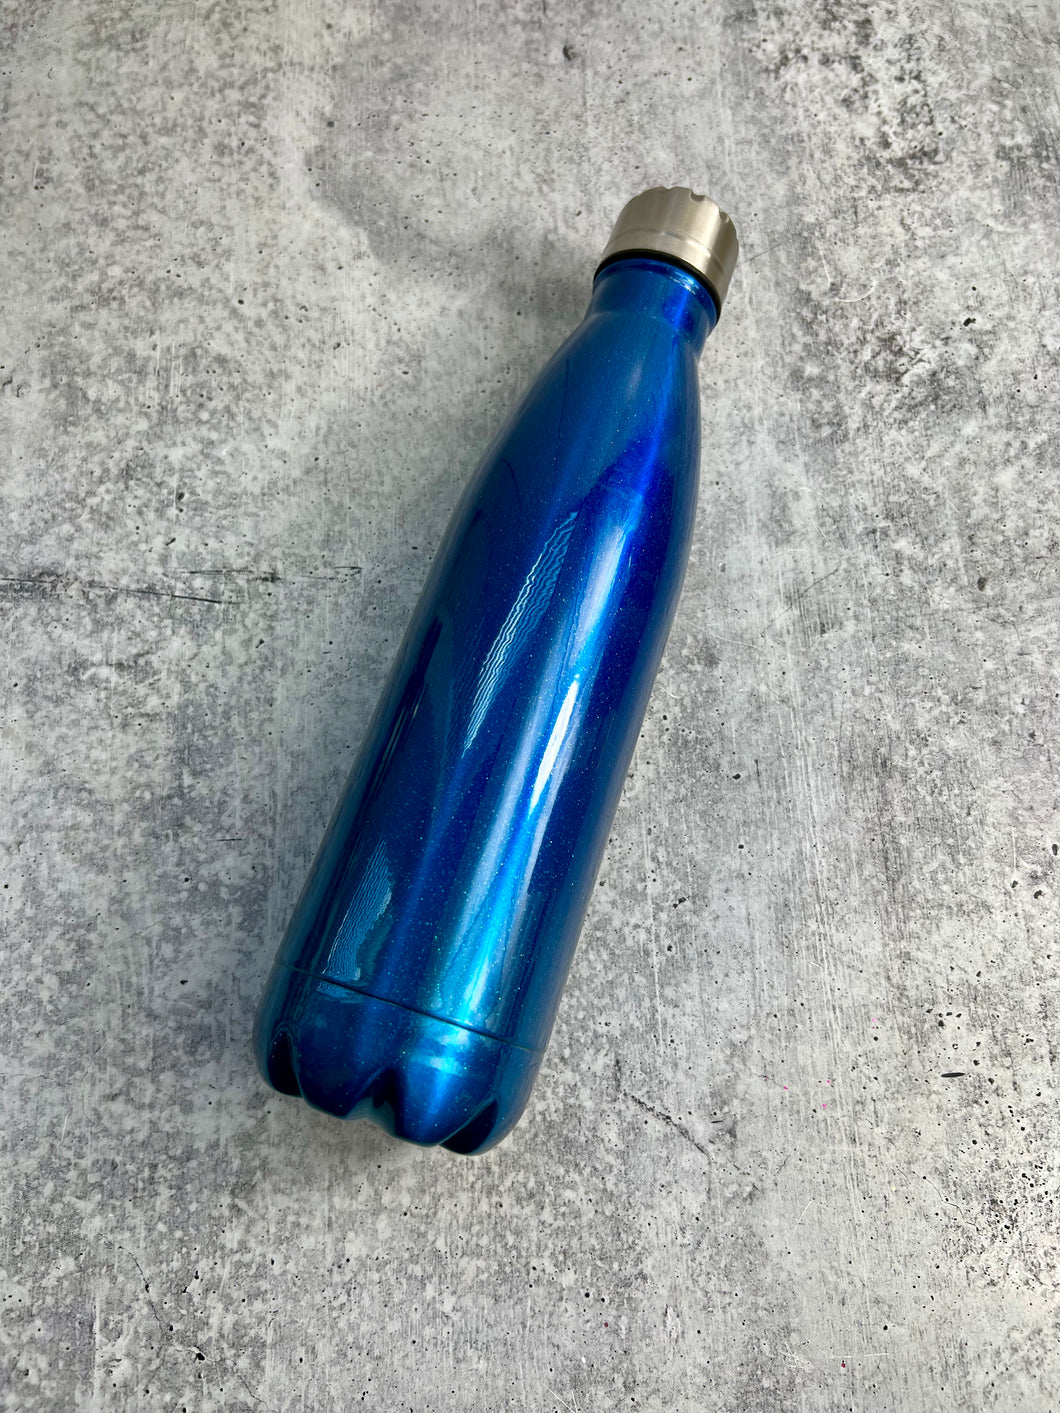 CLEARANCE - Blue Powder Coated Stainless Steel water bottle, 17 oz